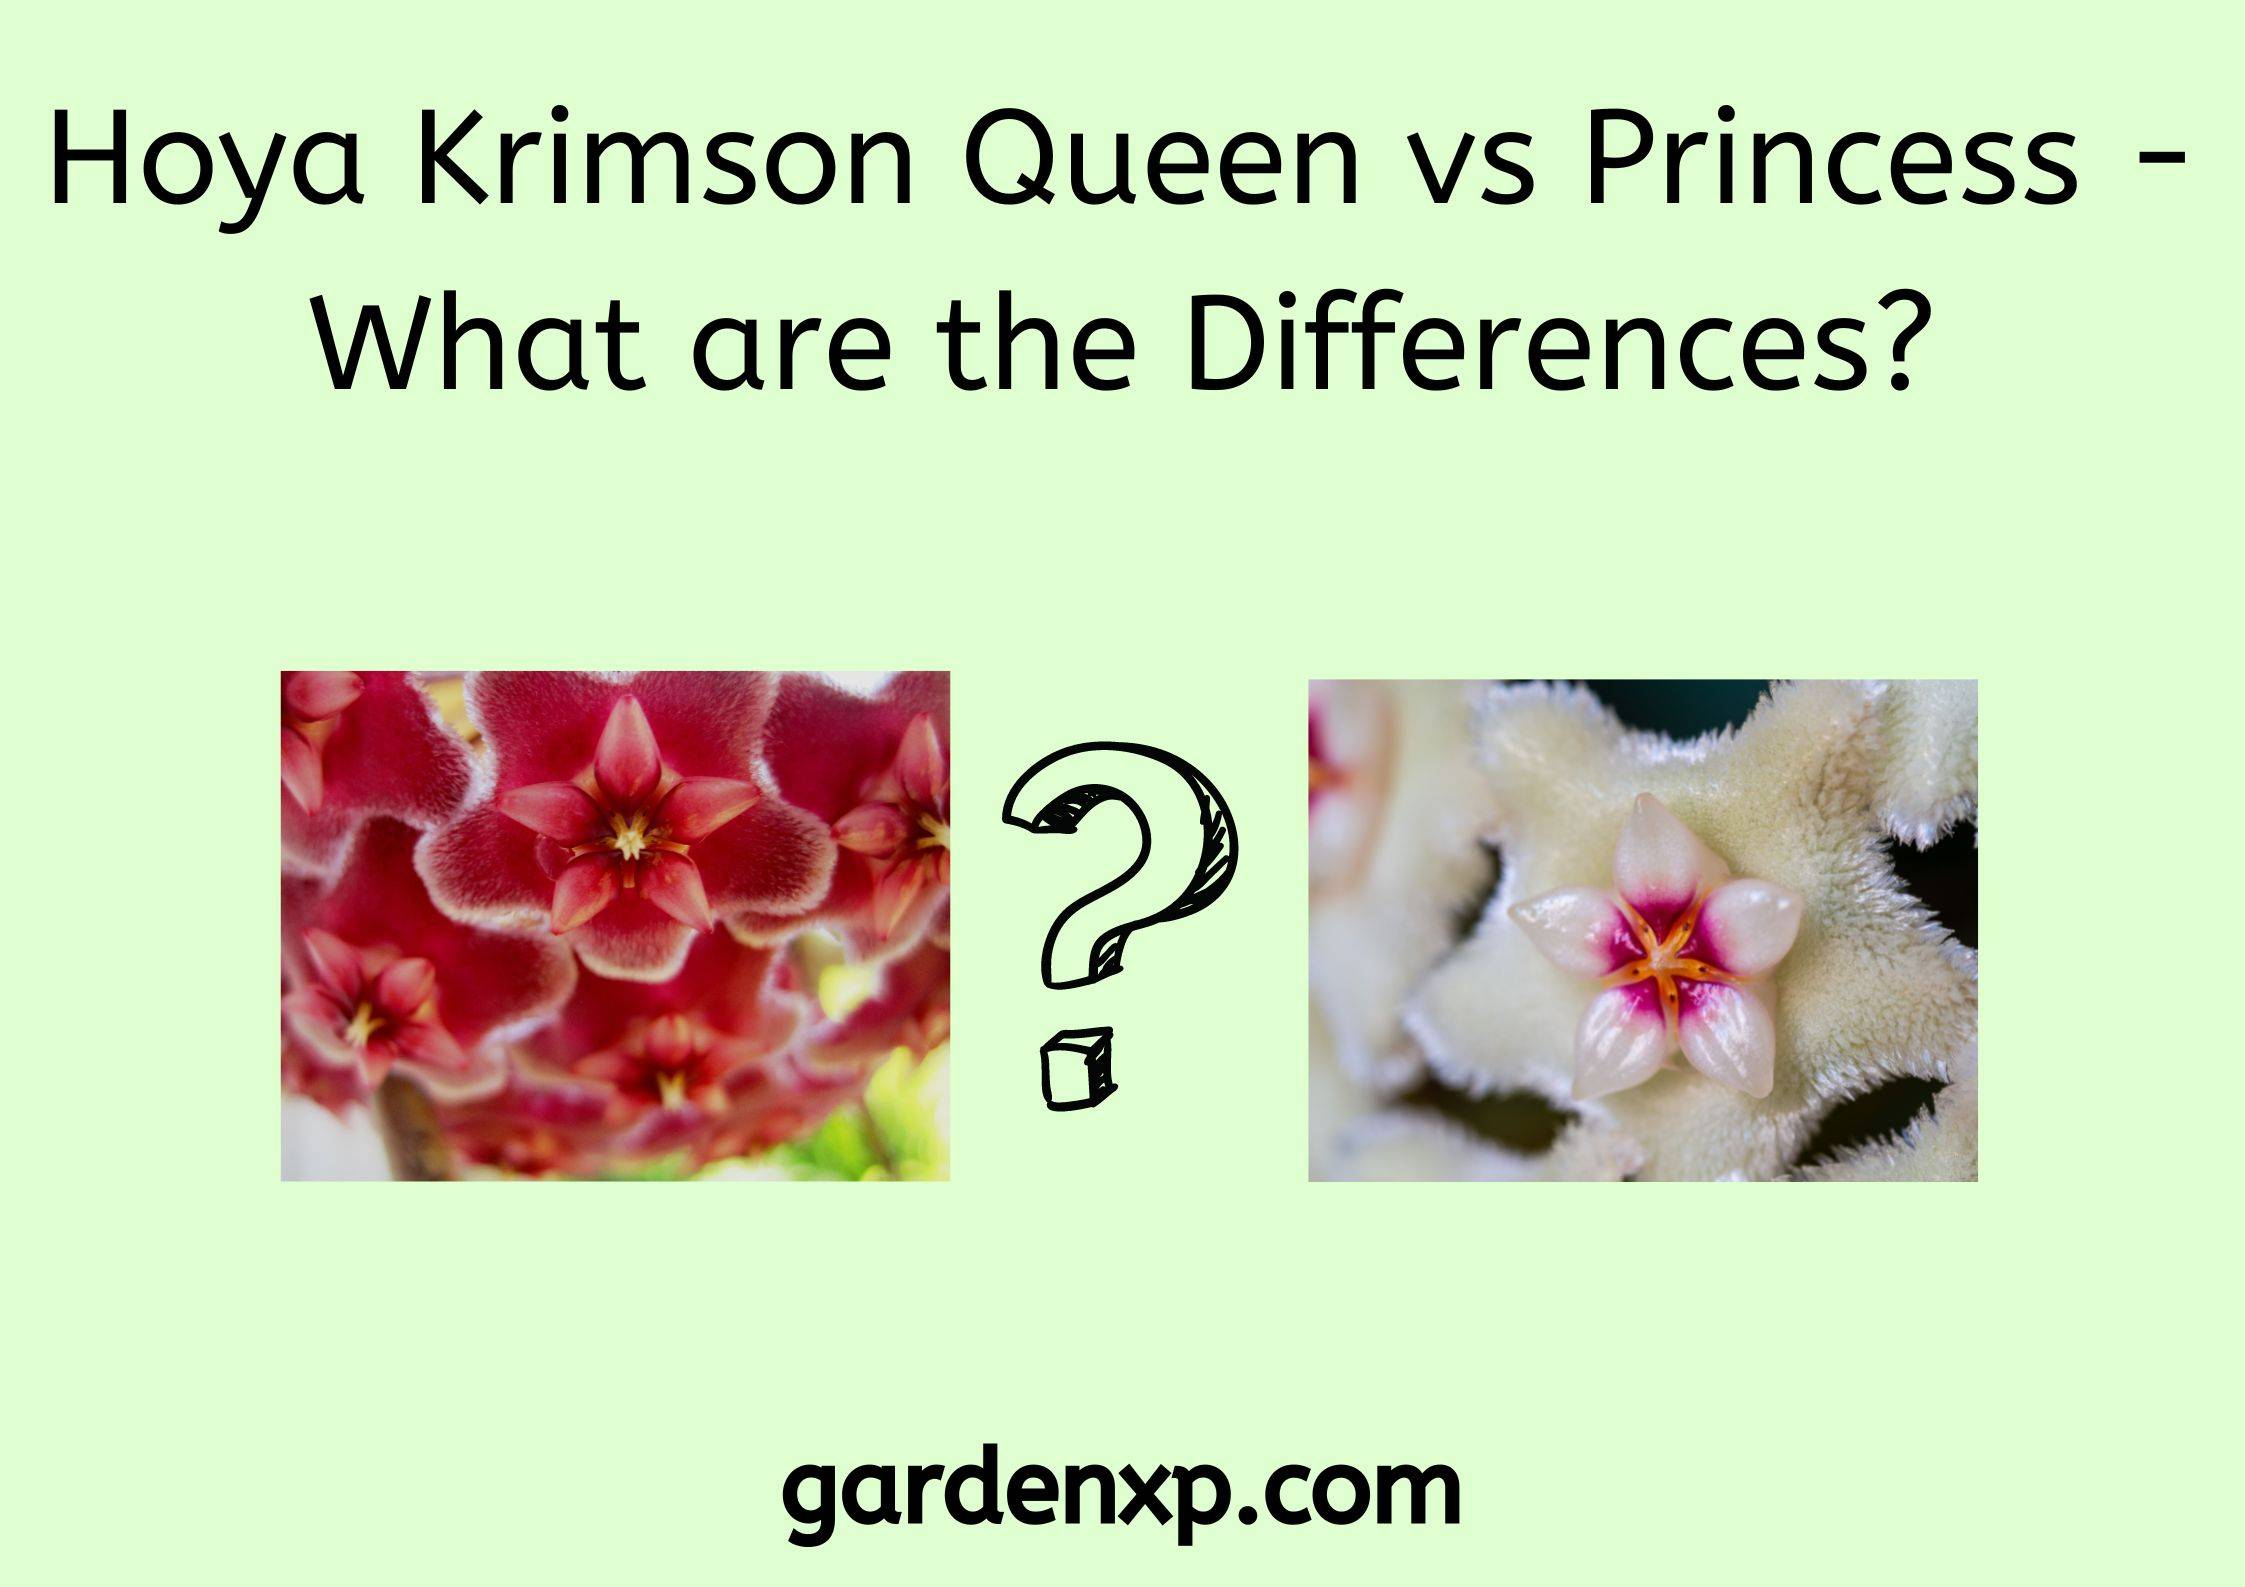 Hoya Krimson Queen vs Princess - What are the Differences?